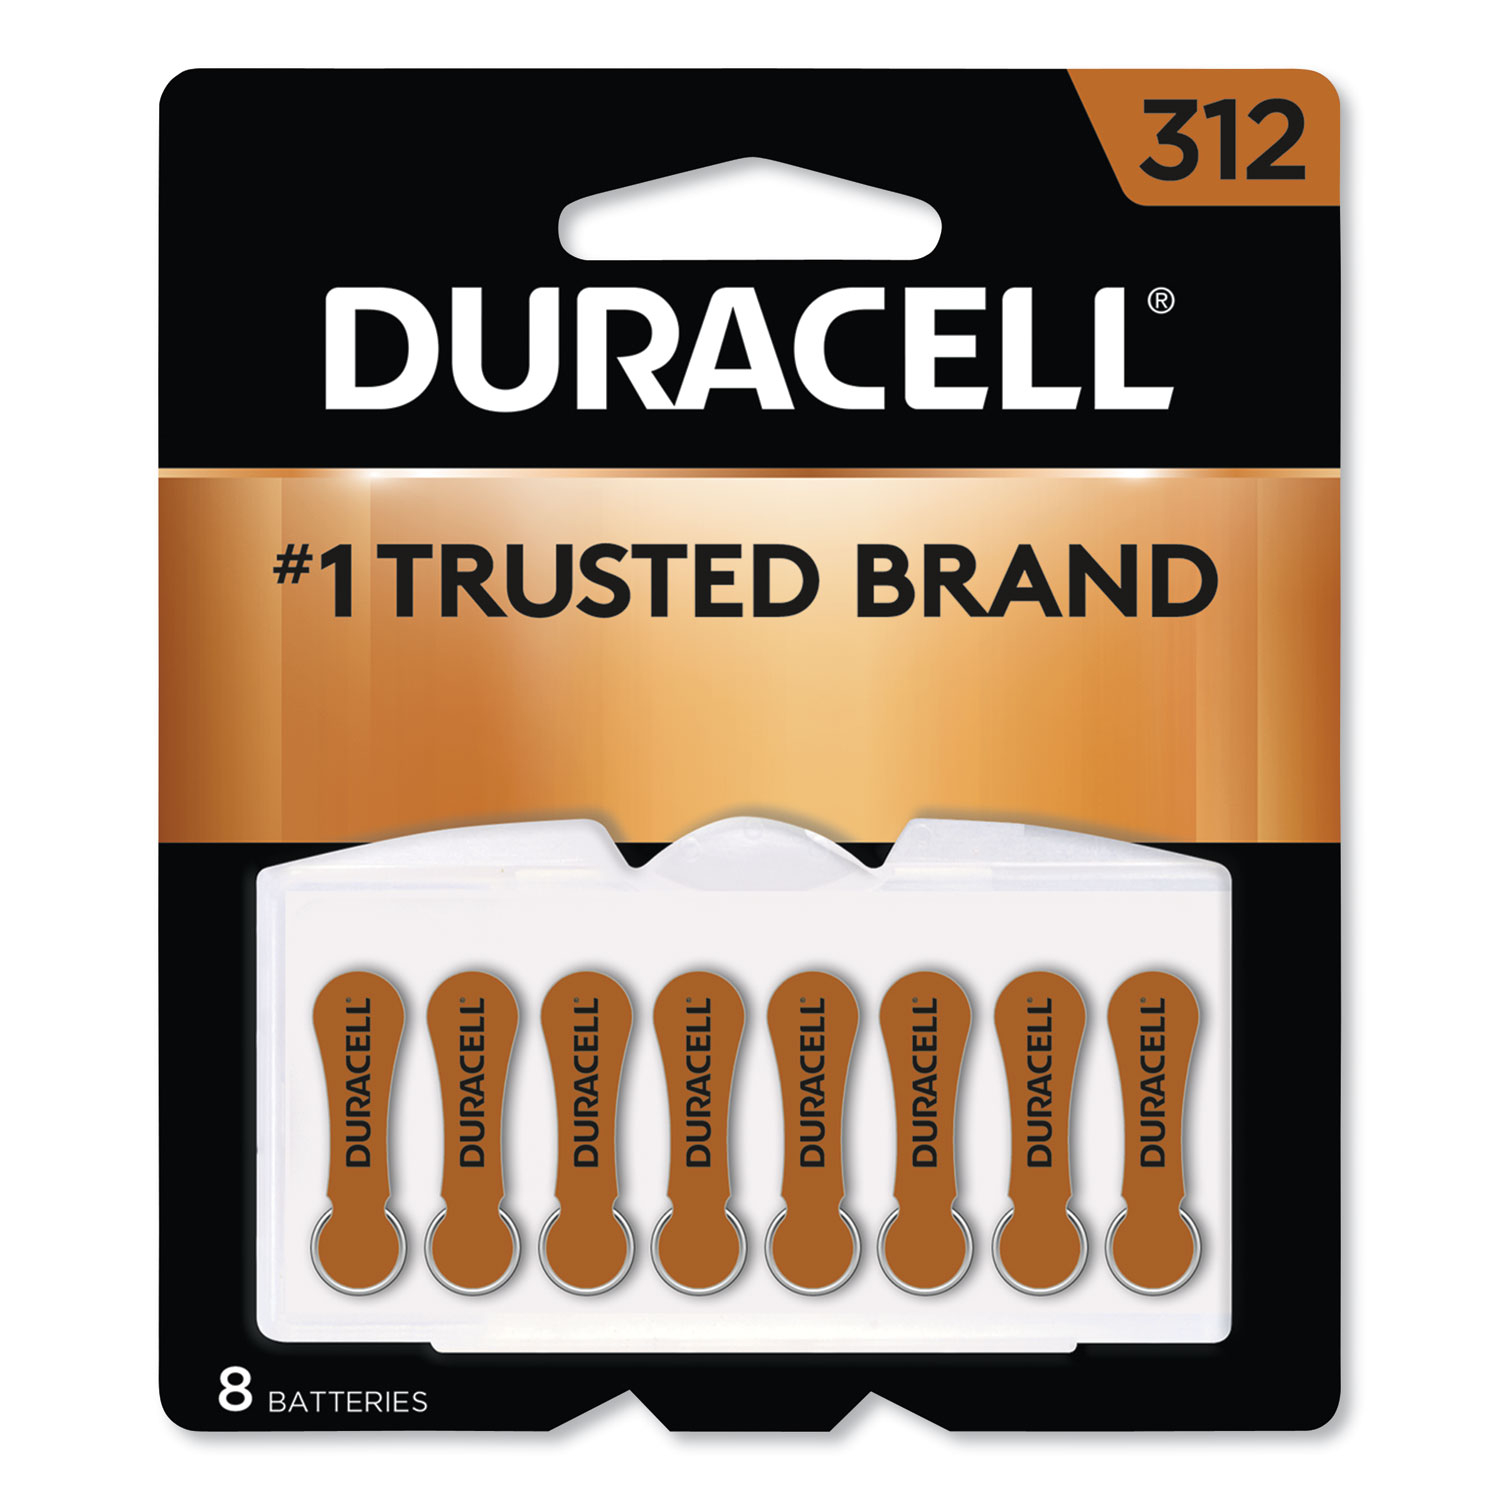 duracell-hearing-aid-batteries-312-coupons-printable-freeprintable-me